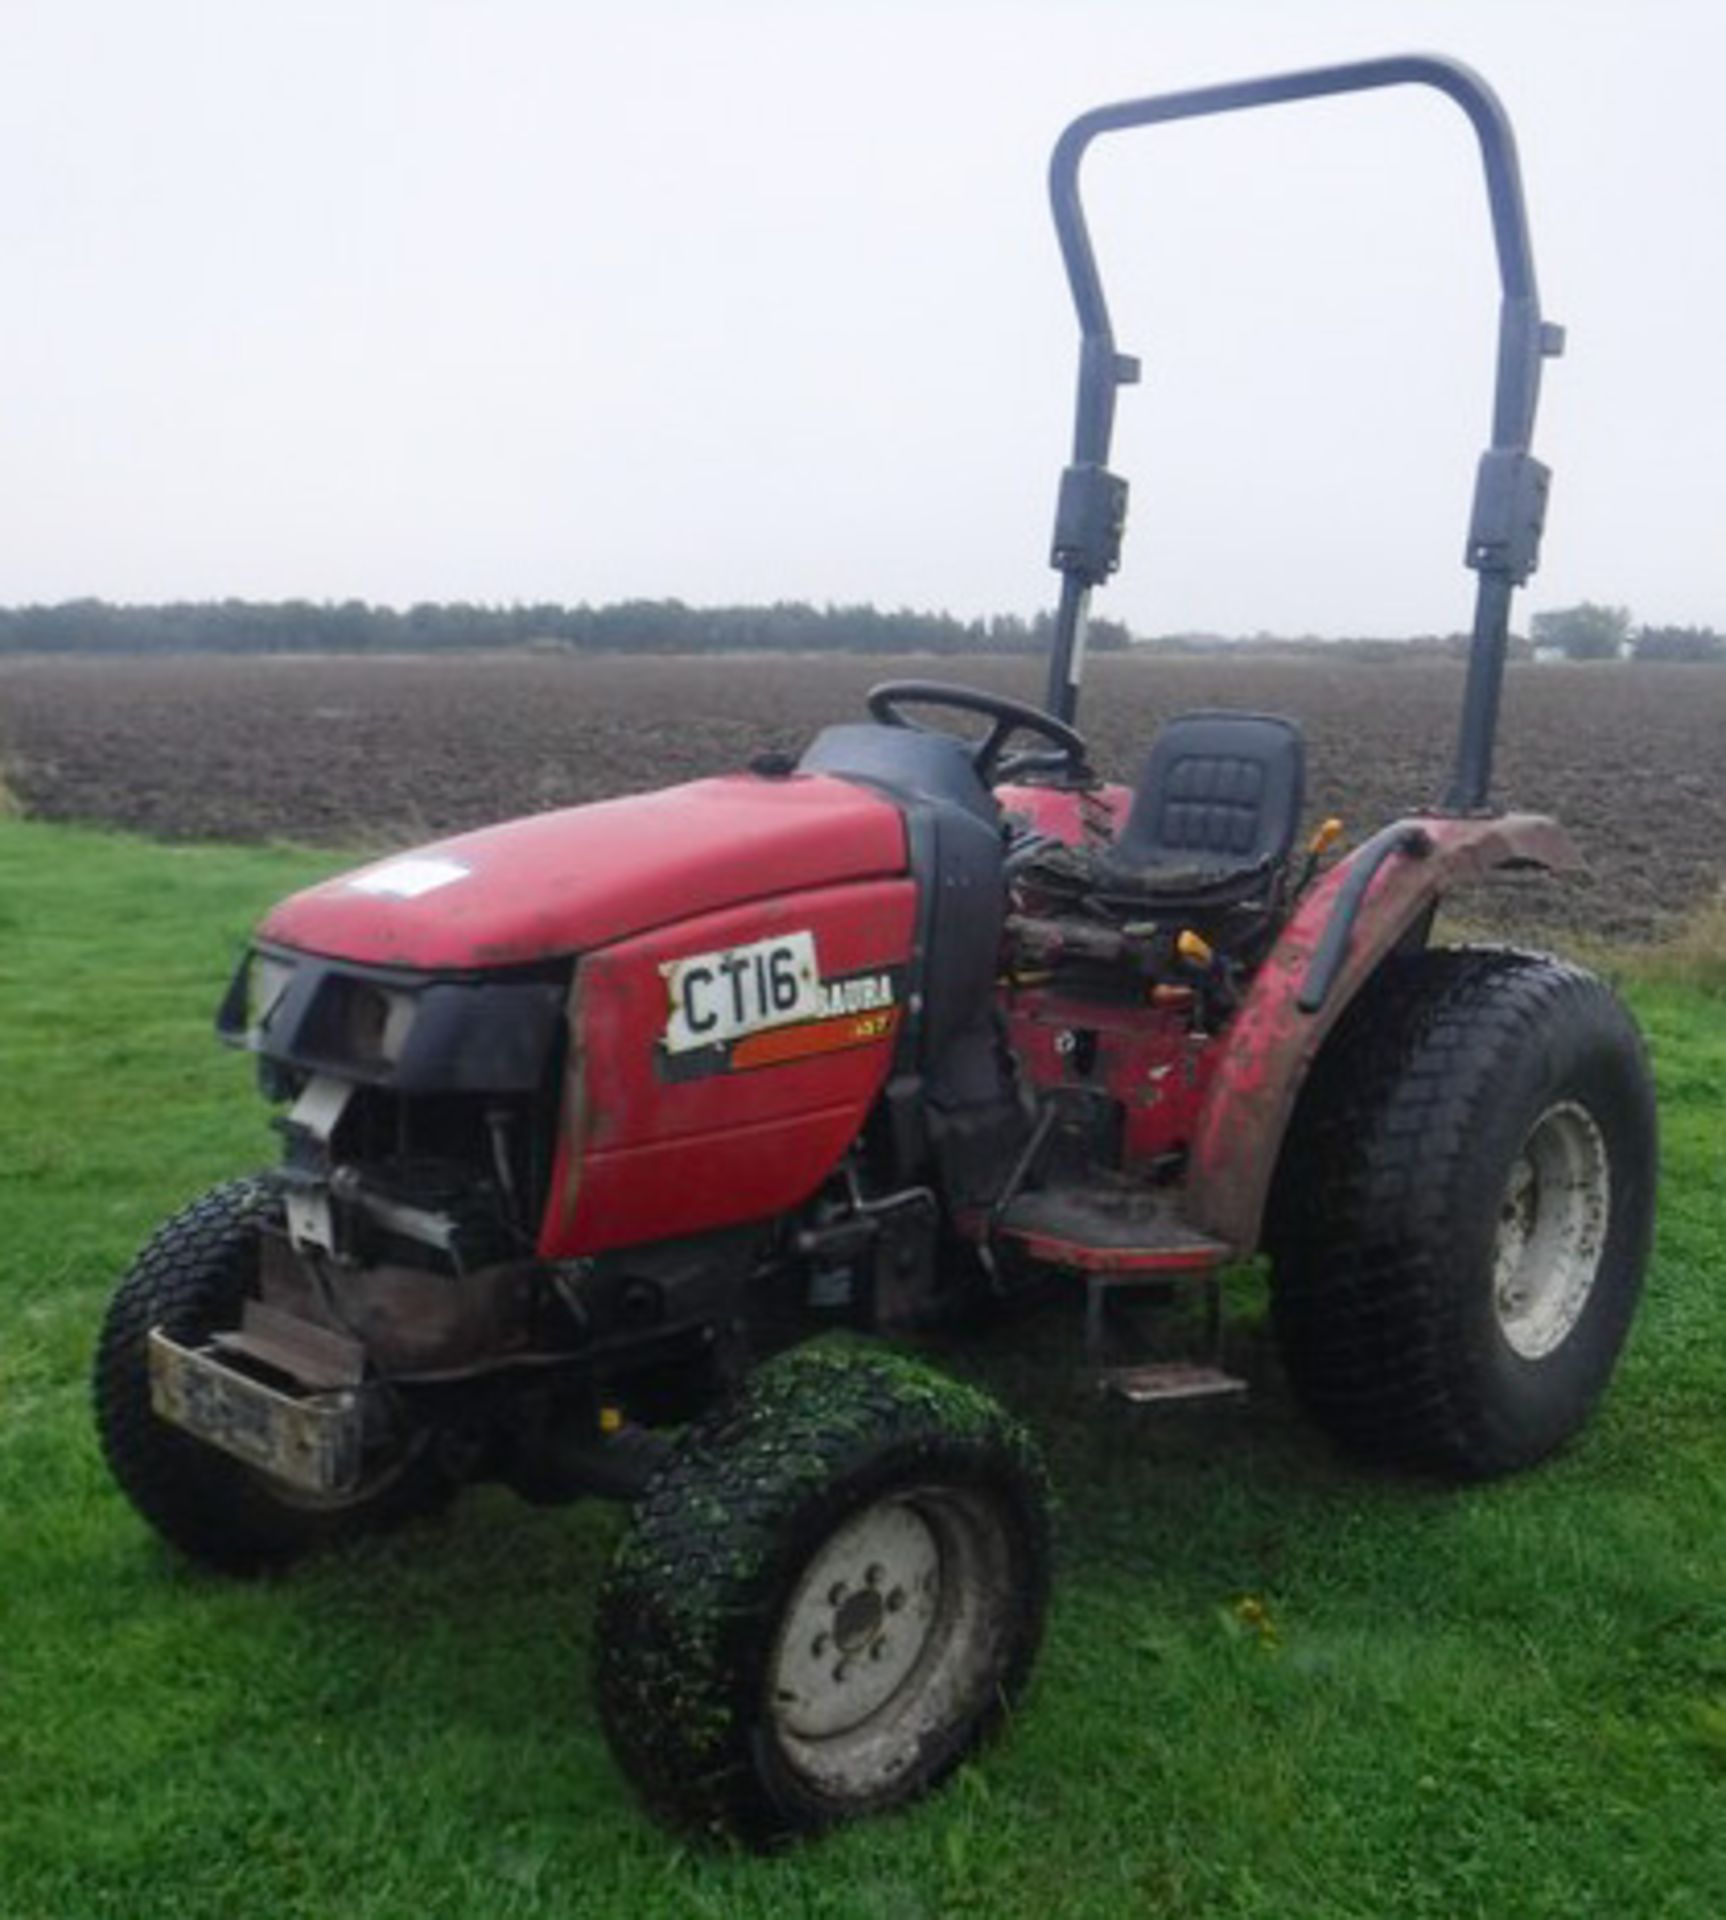 2011 SHIBAURA ST-333 compact tractor. S/N 21196, 2373hrs (not verified)